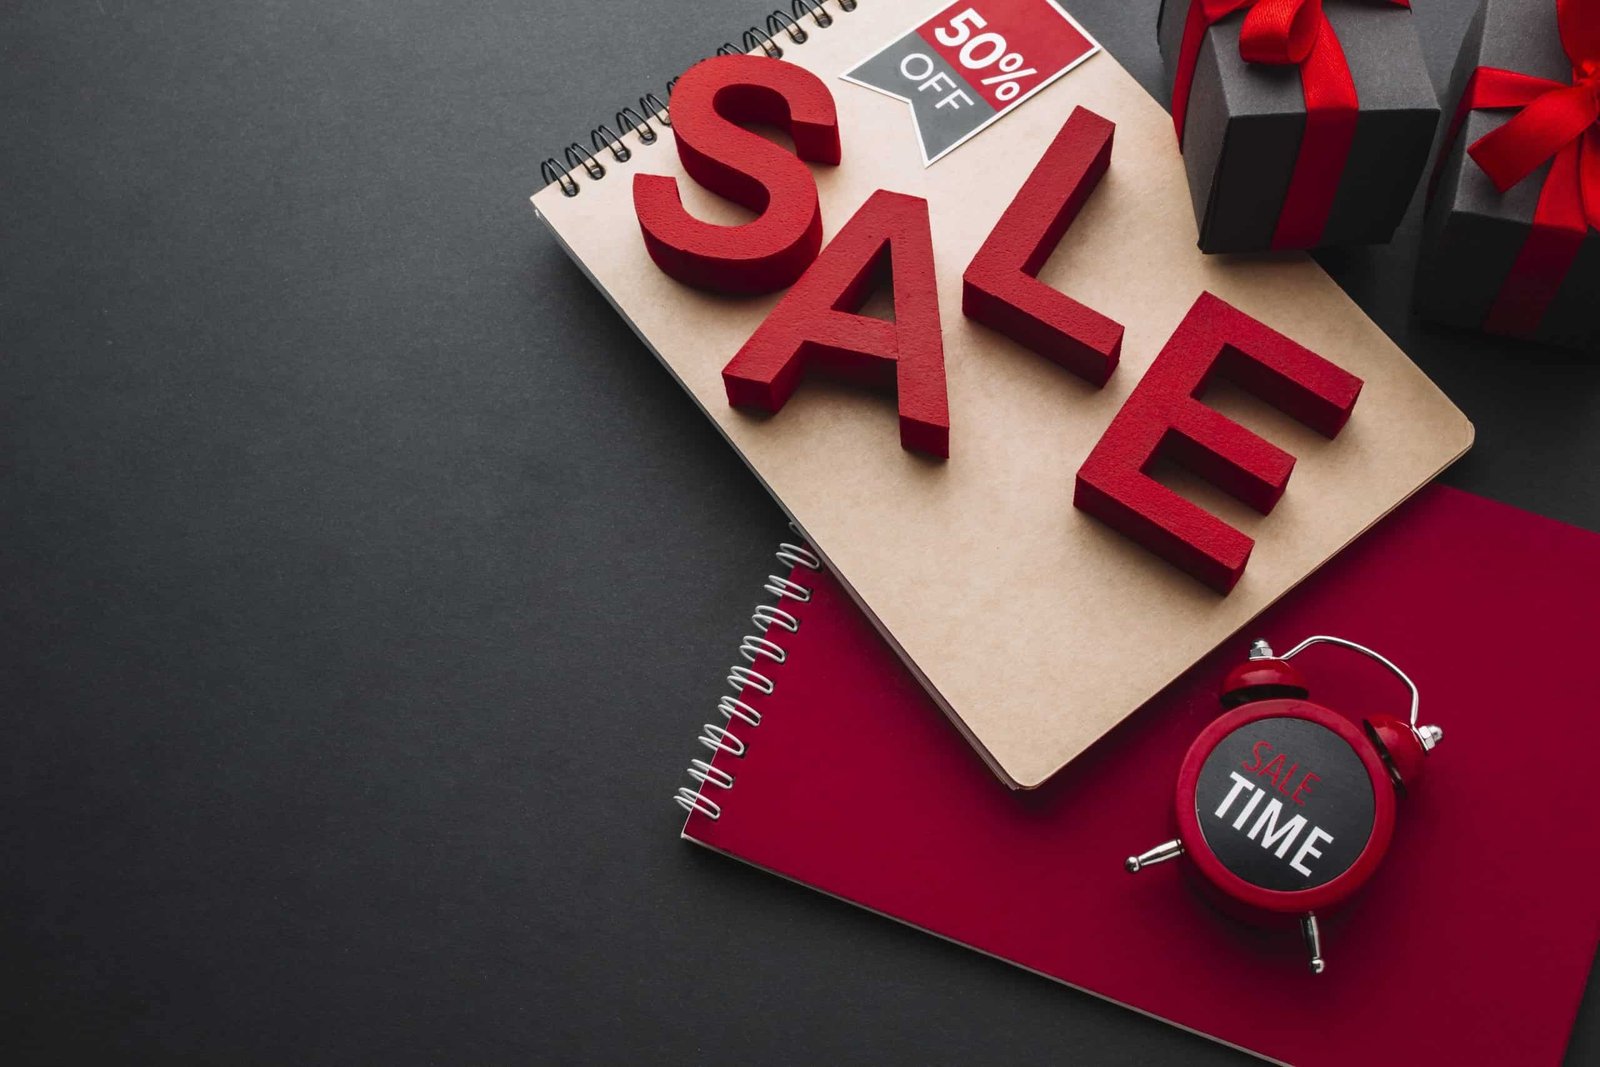 The Best Online Sales Right Now: Weekly Roundup